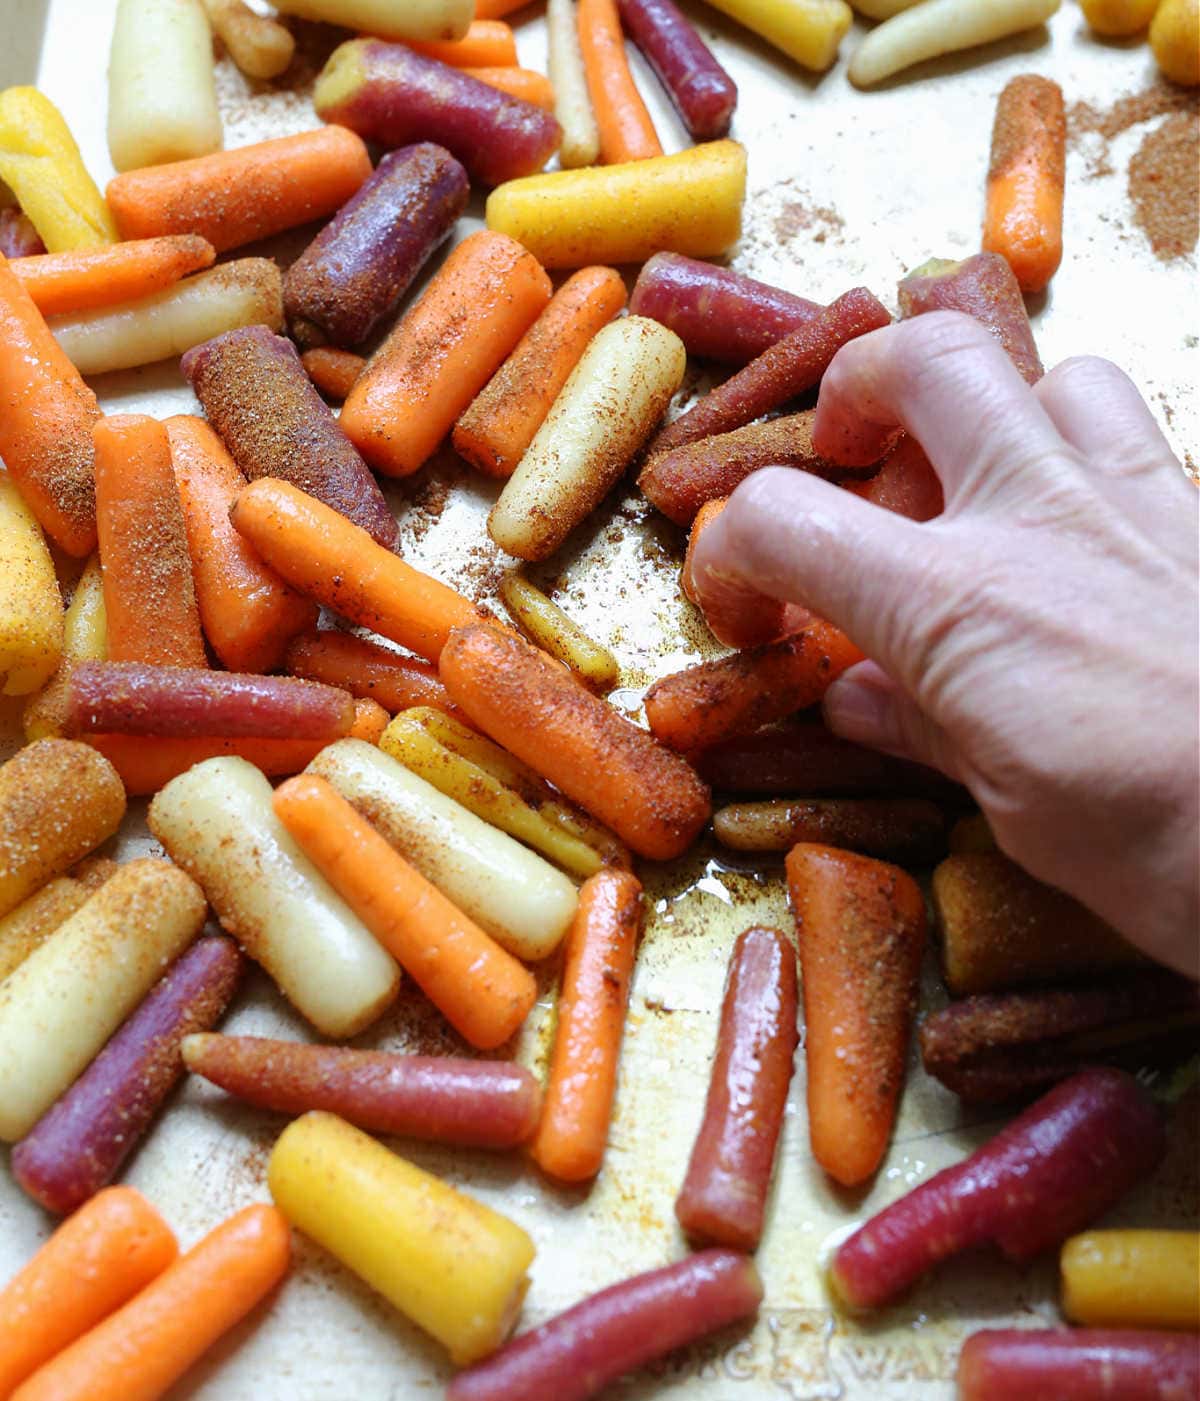 hand mixing seasonings and oil on rainbow carrots for roasting